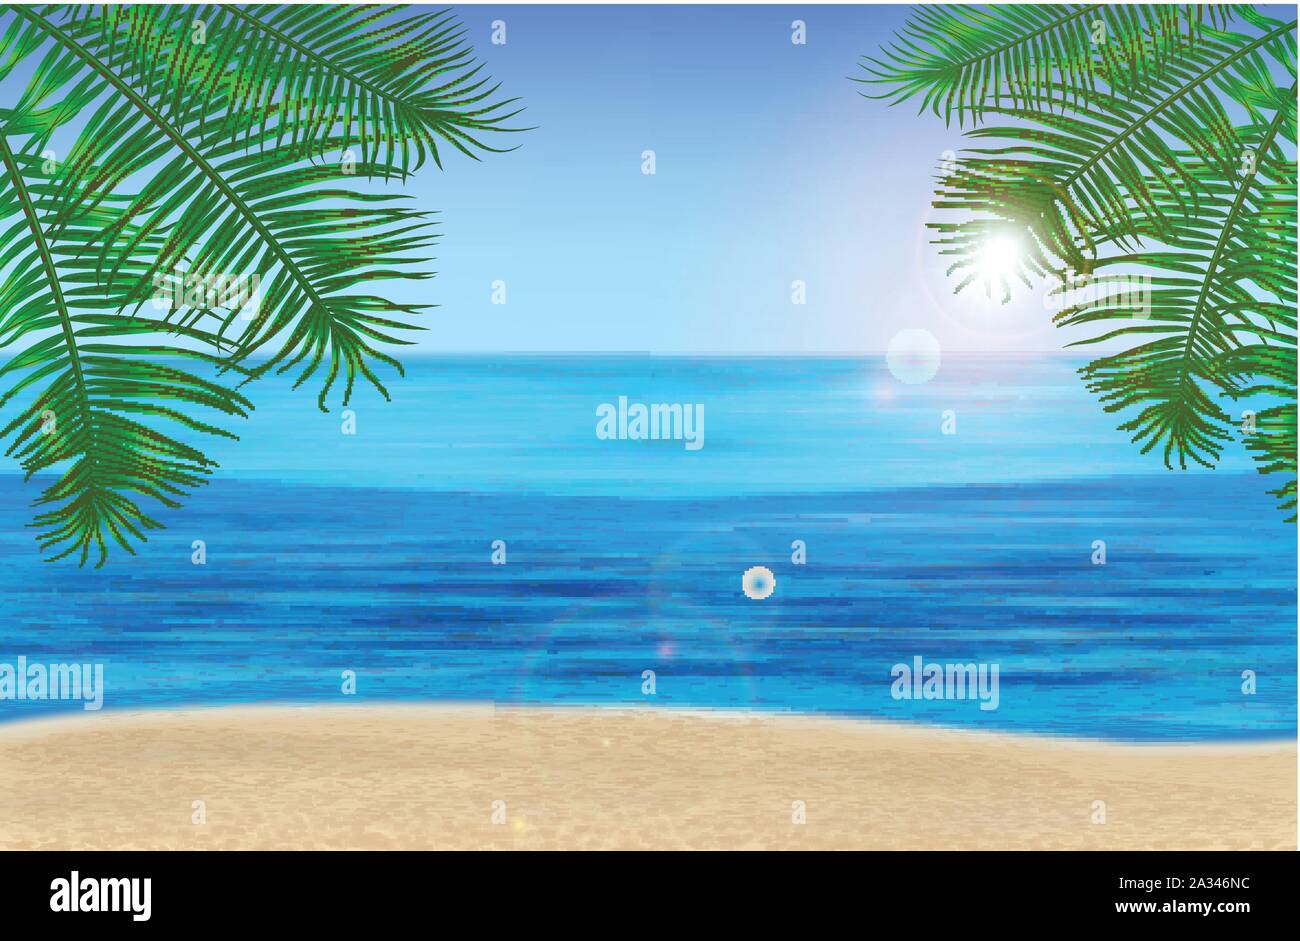 The sea, palm trees and tropical beach under blue sky. Vector illustration Stock Vector